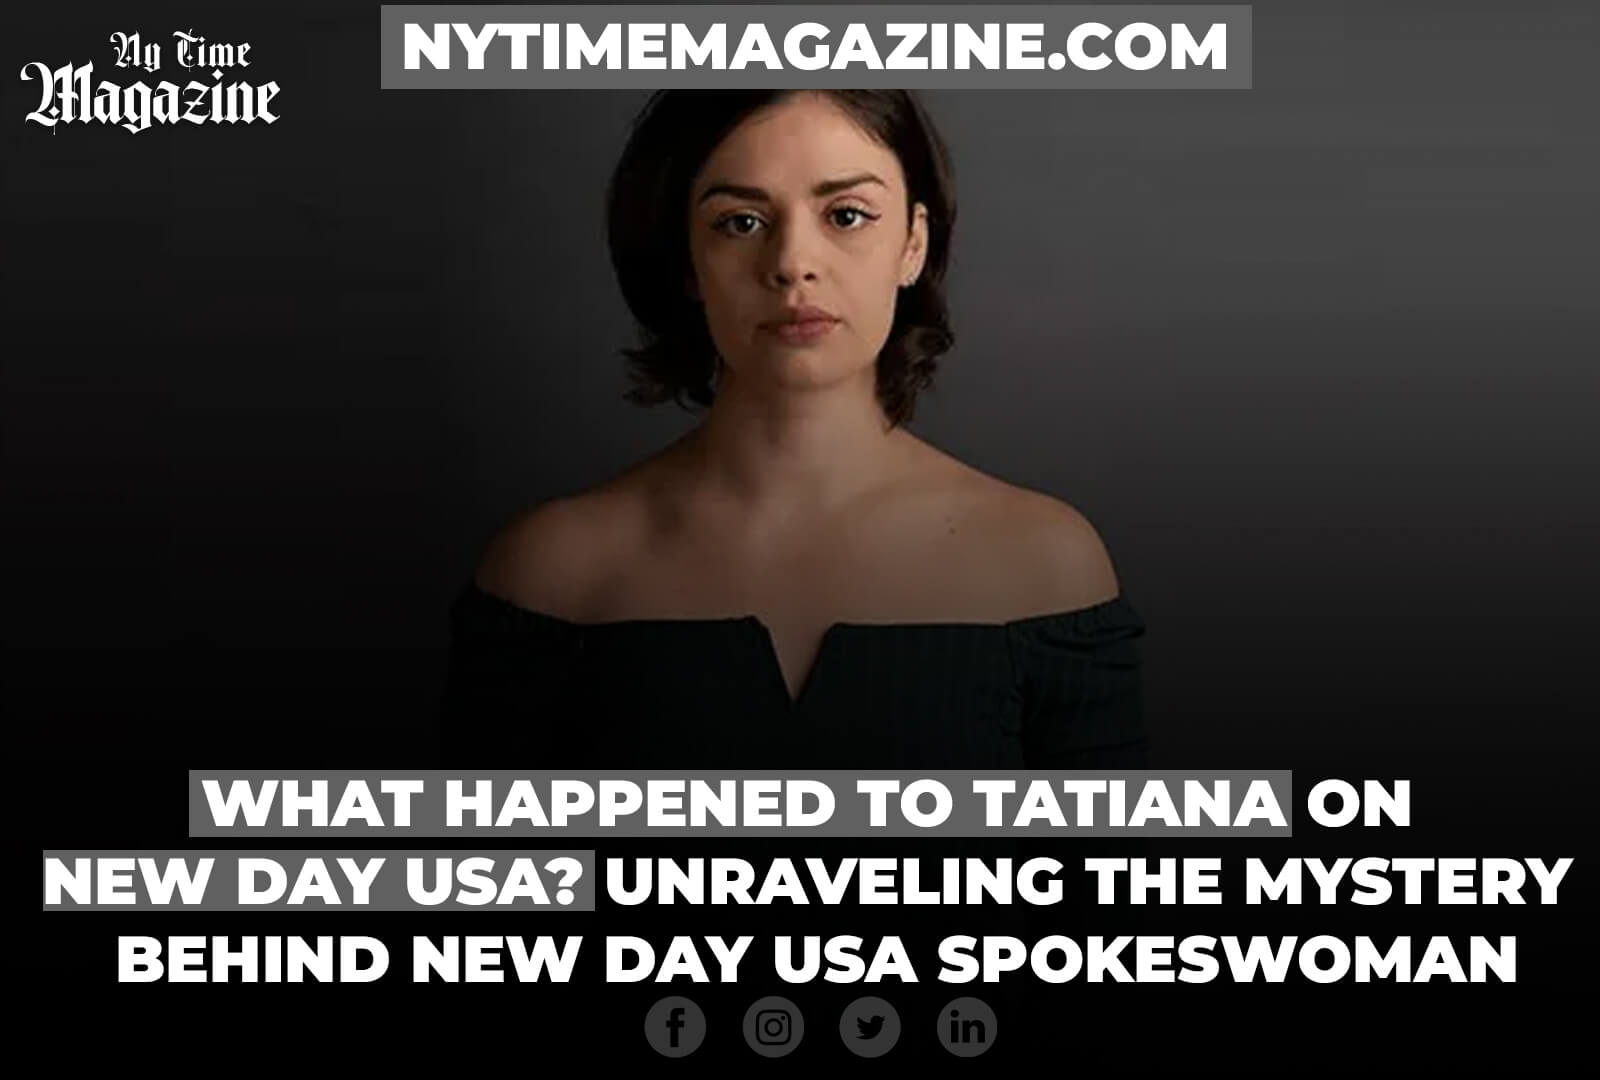 What Happened to Tatiana on New Day USA? Unraveling the Mystery Behind New Day USA Spokeswoman